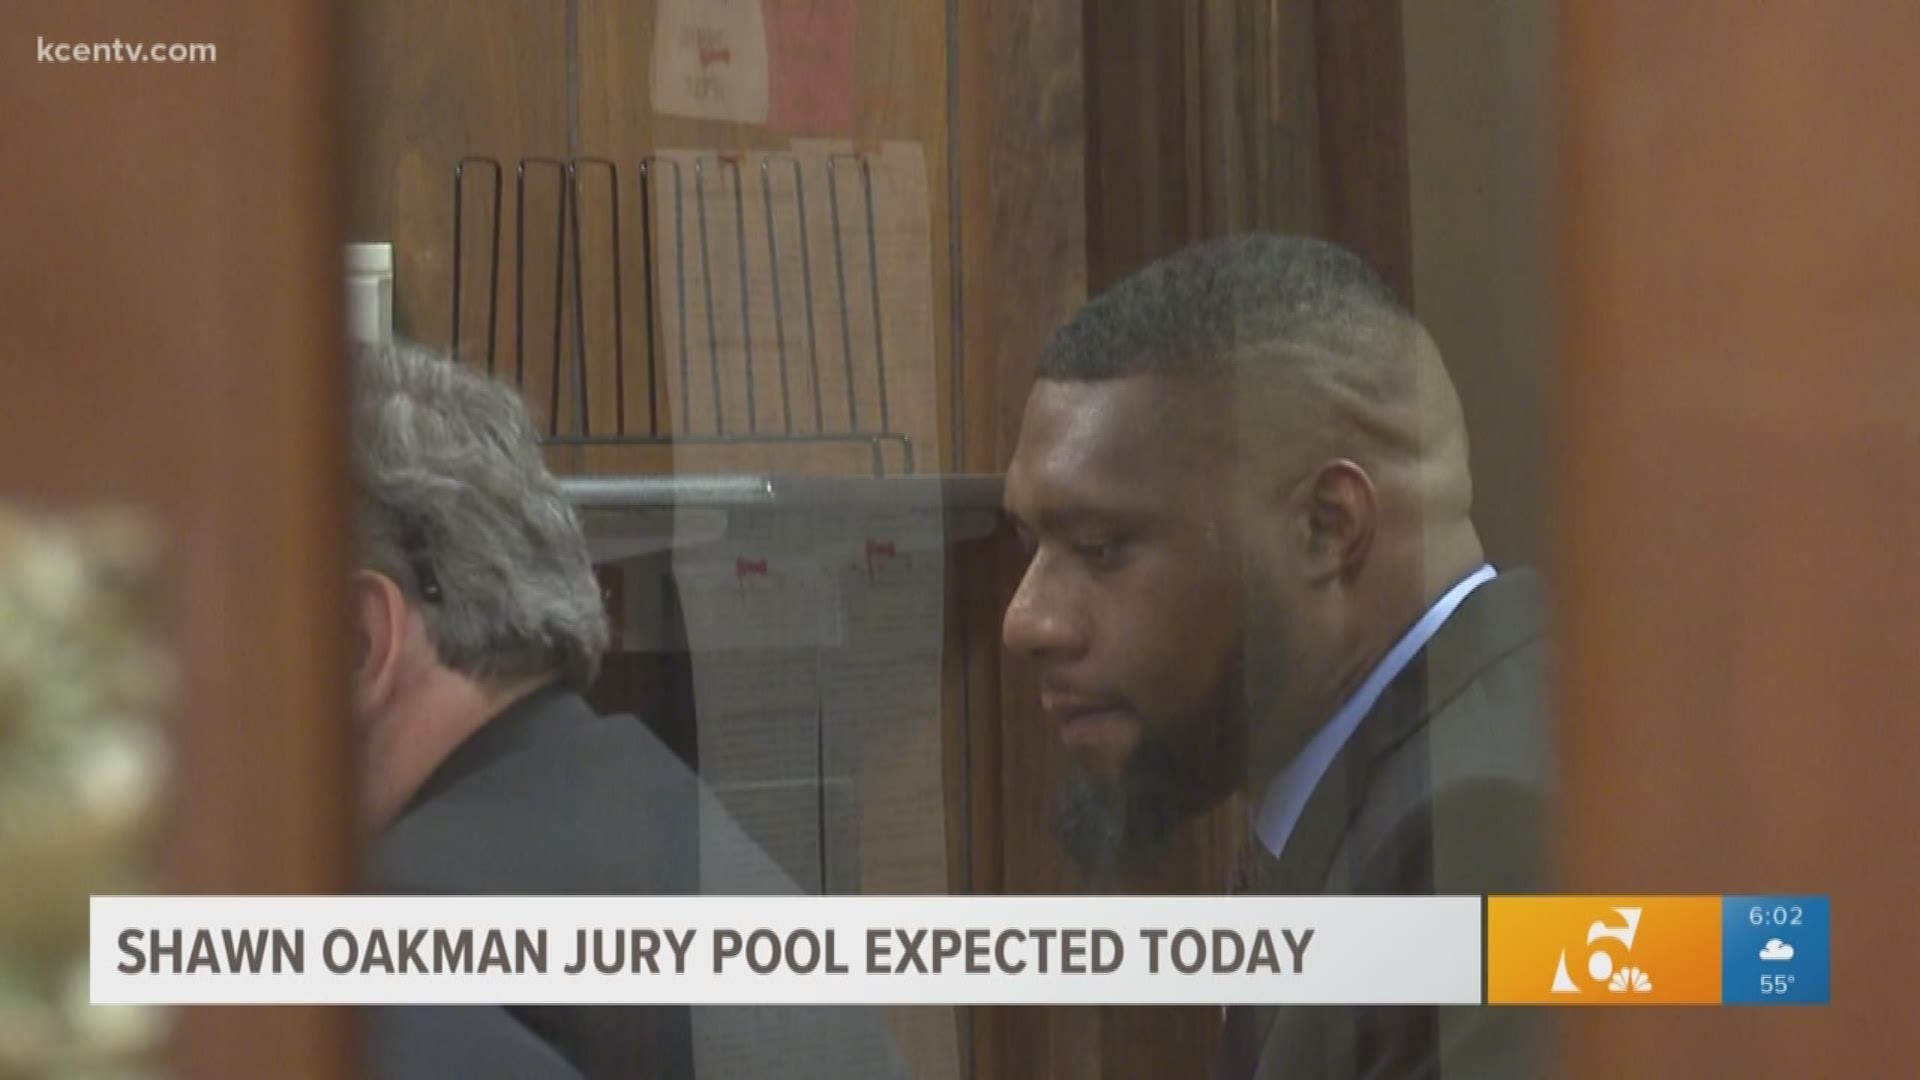 Judge will reevaluate change of venue request in former Baylor football player Shawn Oakman's rape case based on questionnaires from the jury pool, which is expected to happen Friday morning.